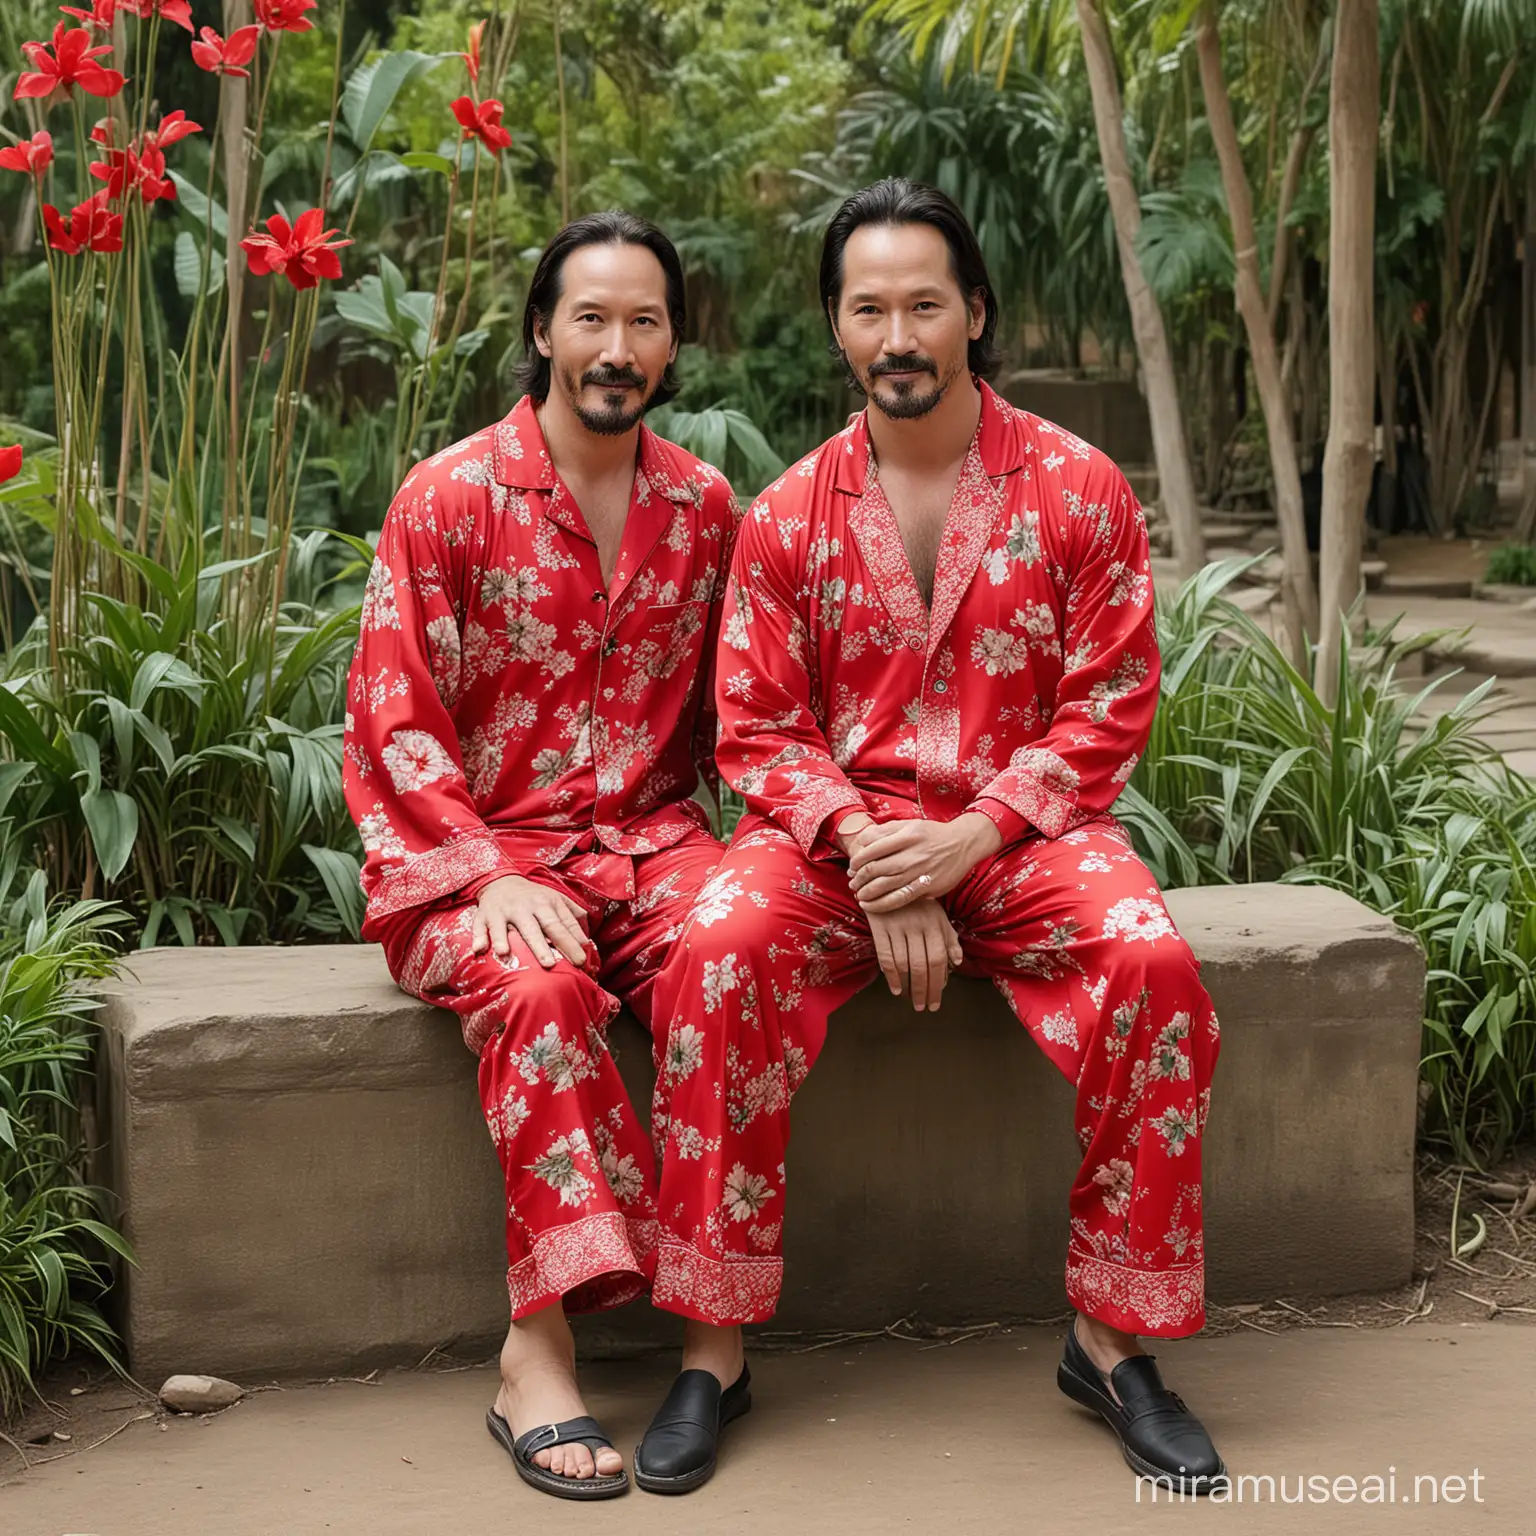 Indonesian Man in Red Floral Pajamas with Keanu Reeves at Zoo Park